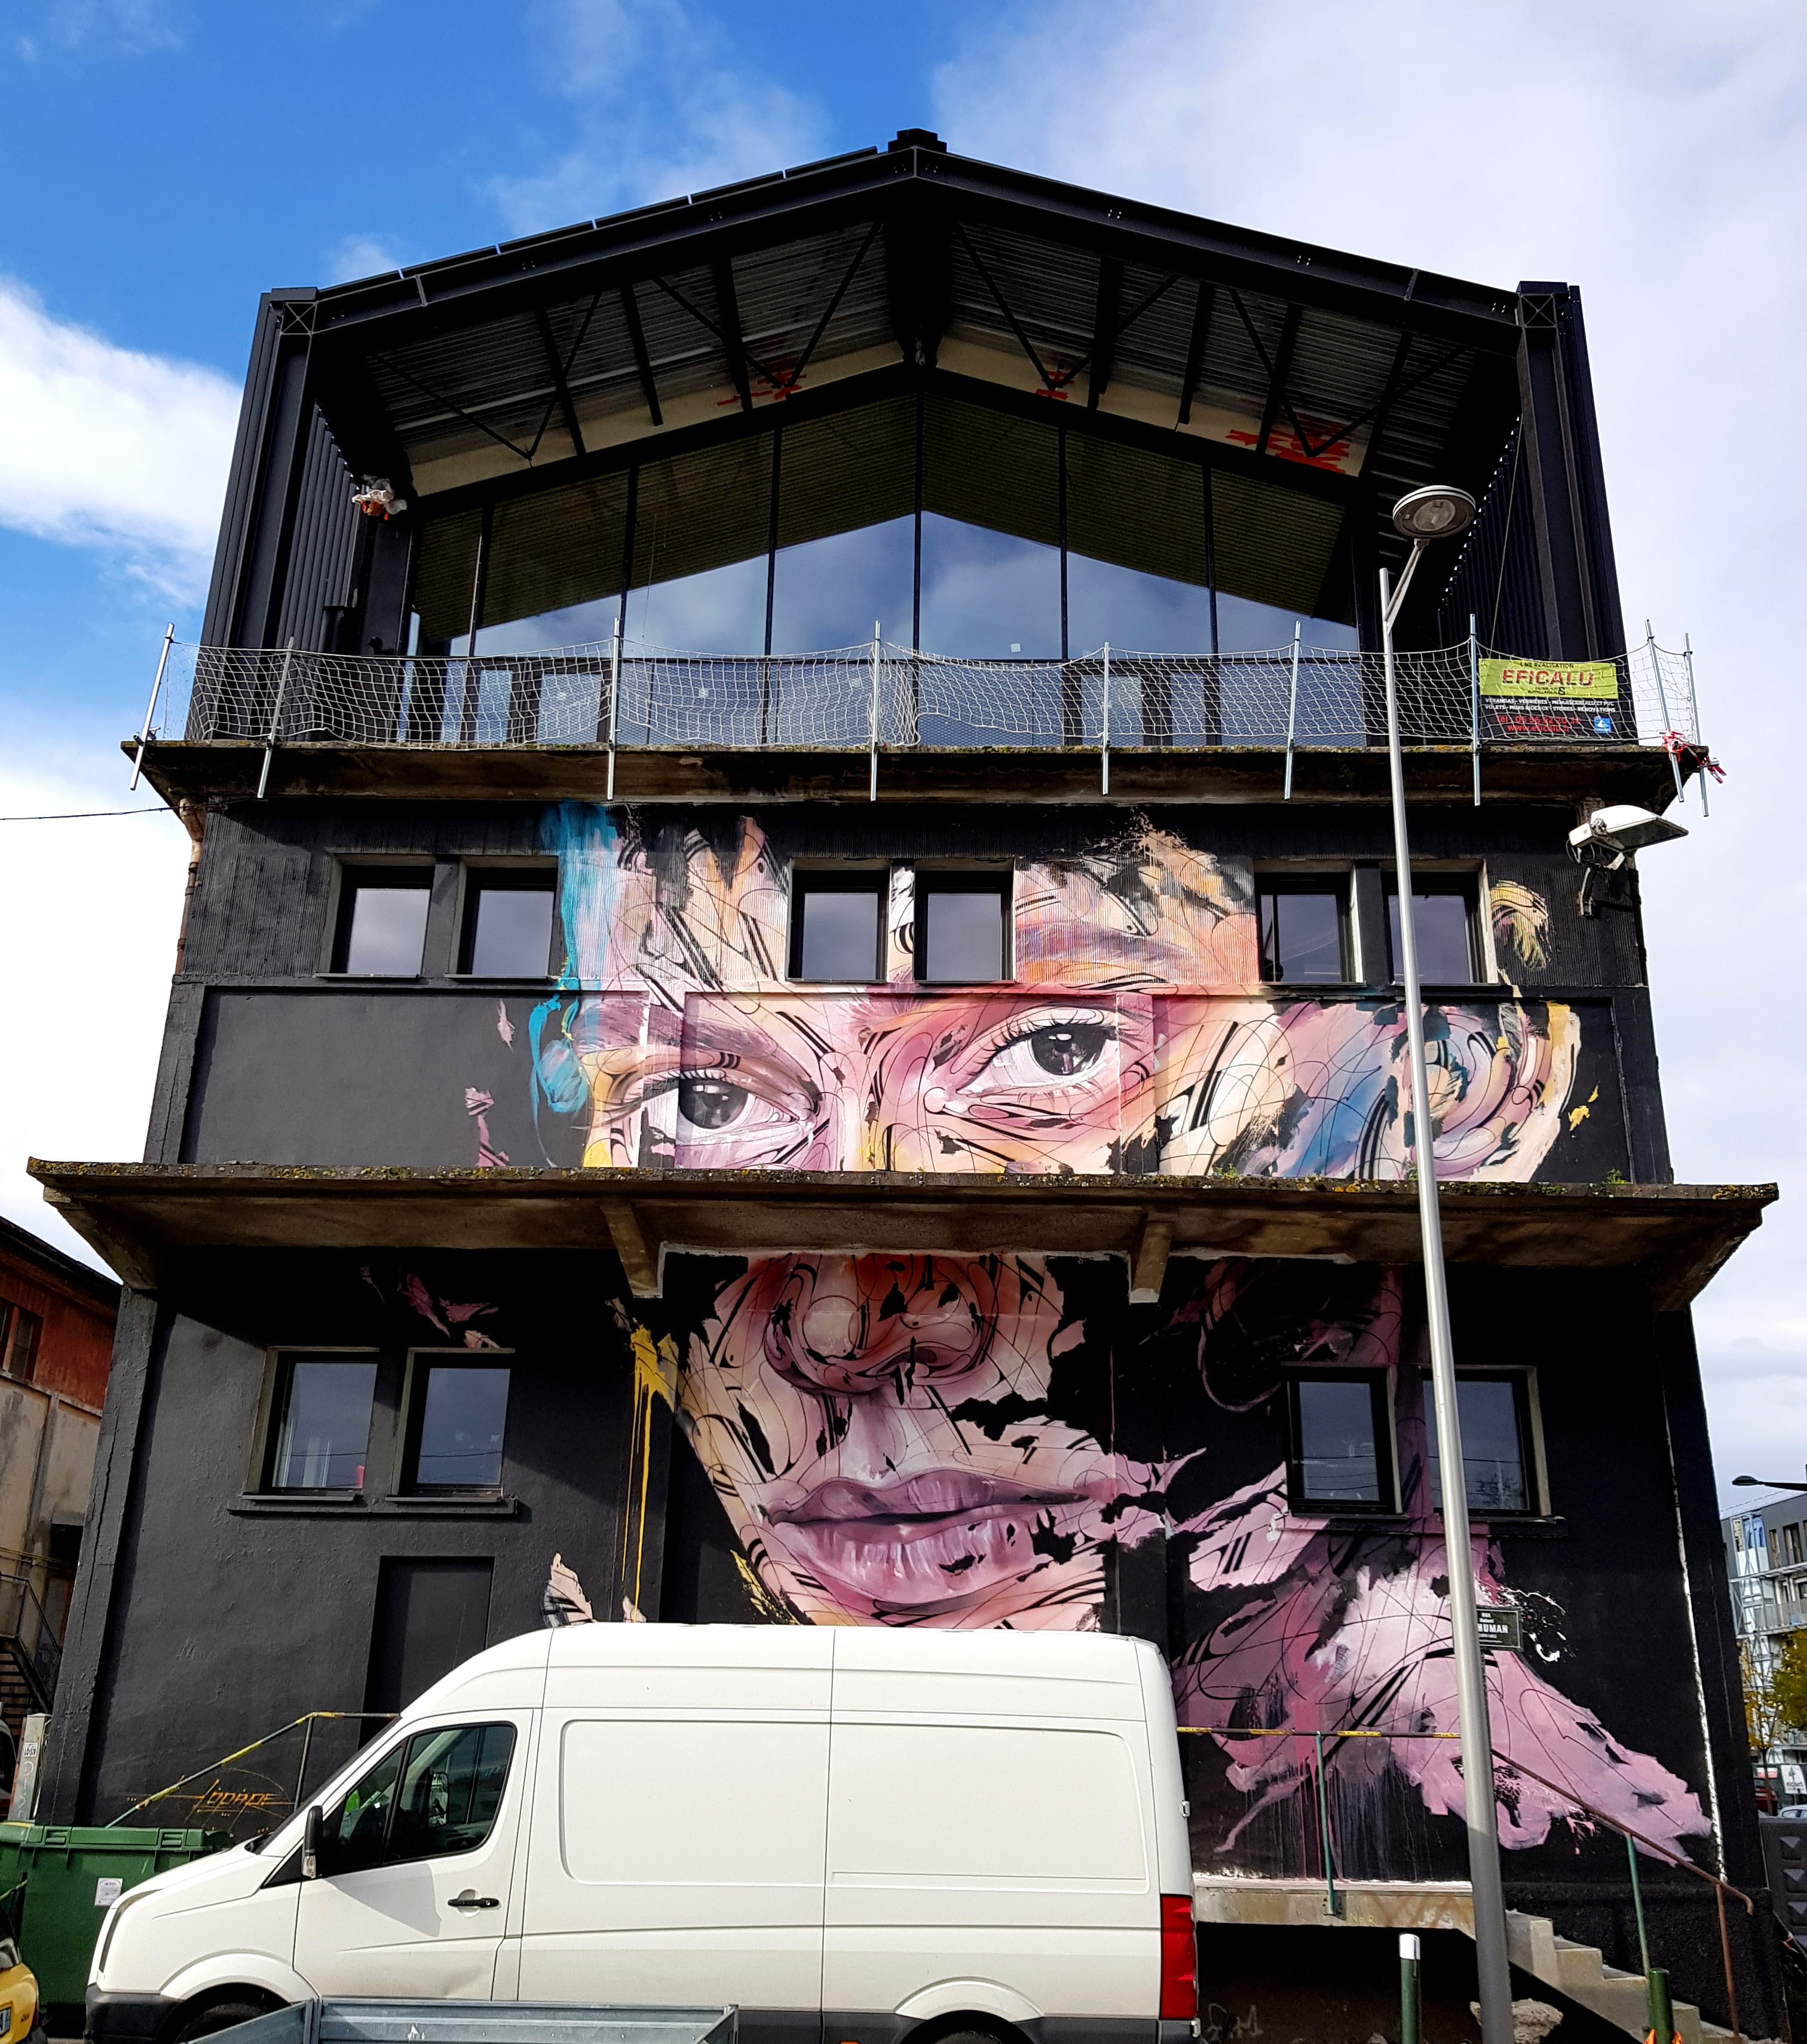 Graffiti 6443  by the artist Hopare captured by Mephisroth in Bègles France